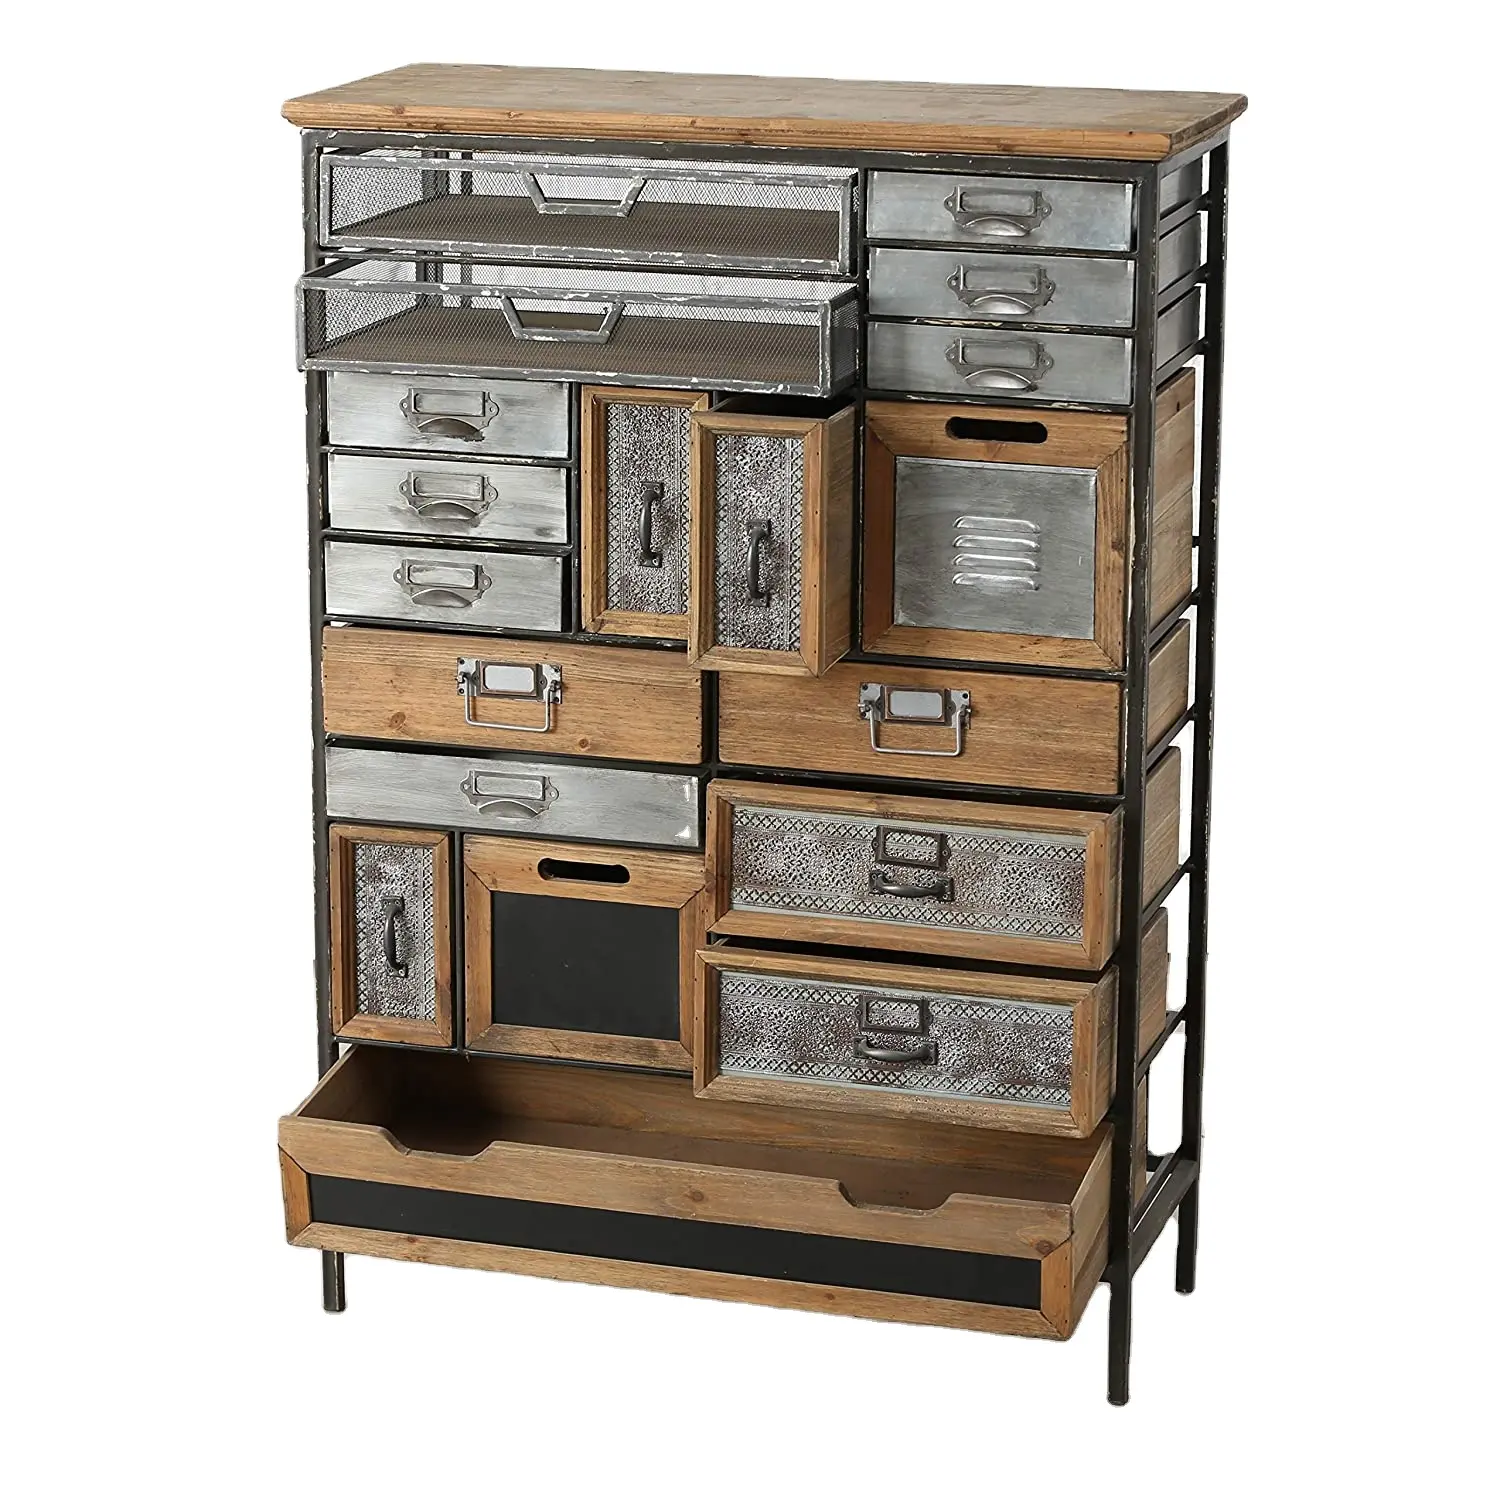 Industrial Style Multi Drawer Chest 17 Drawers and 2 Utility Bins Reclaimed Vintage Style Iron Weathered Finish